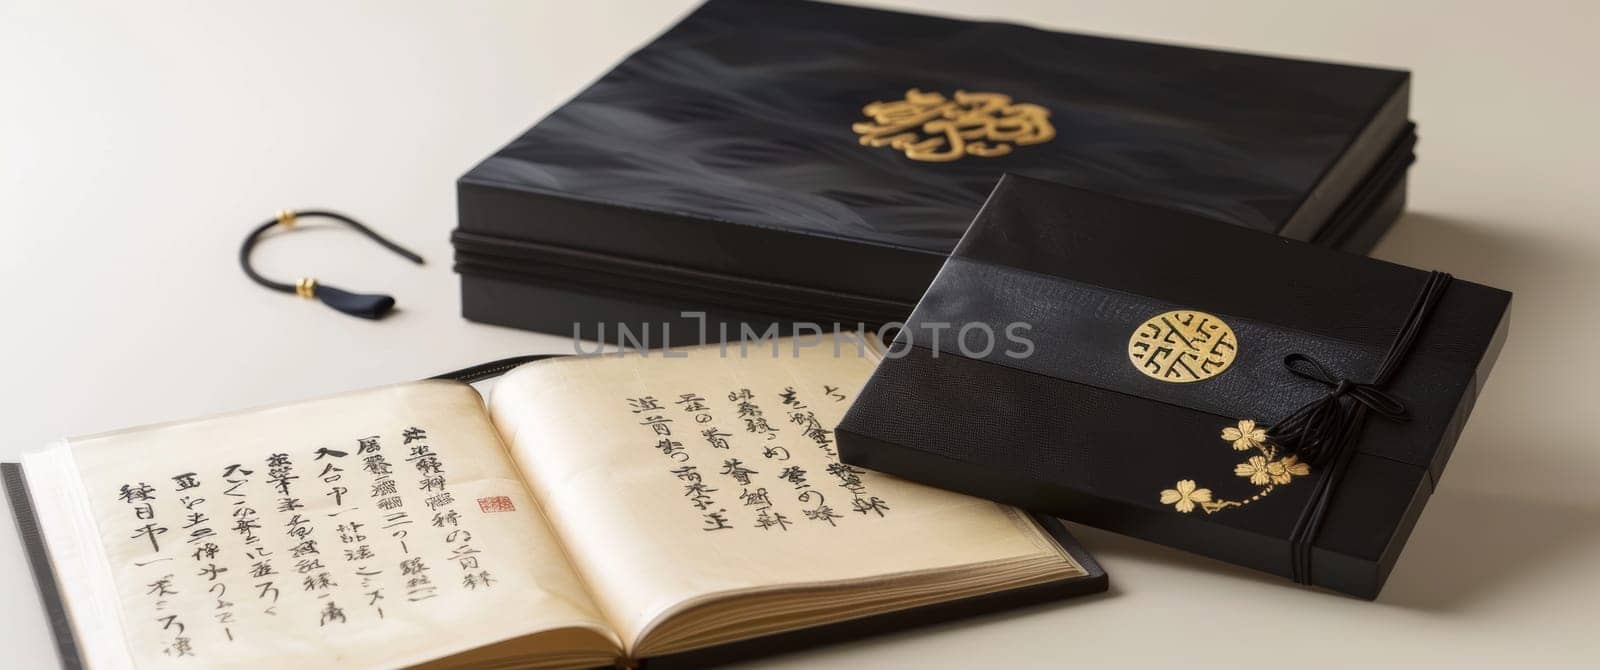 Open calligraphy books alongside a black case, showcasing Japans revered practice of written expression. by sfinks